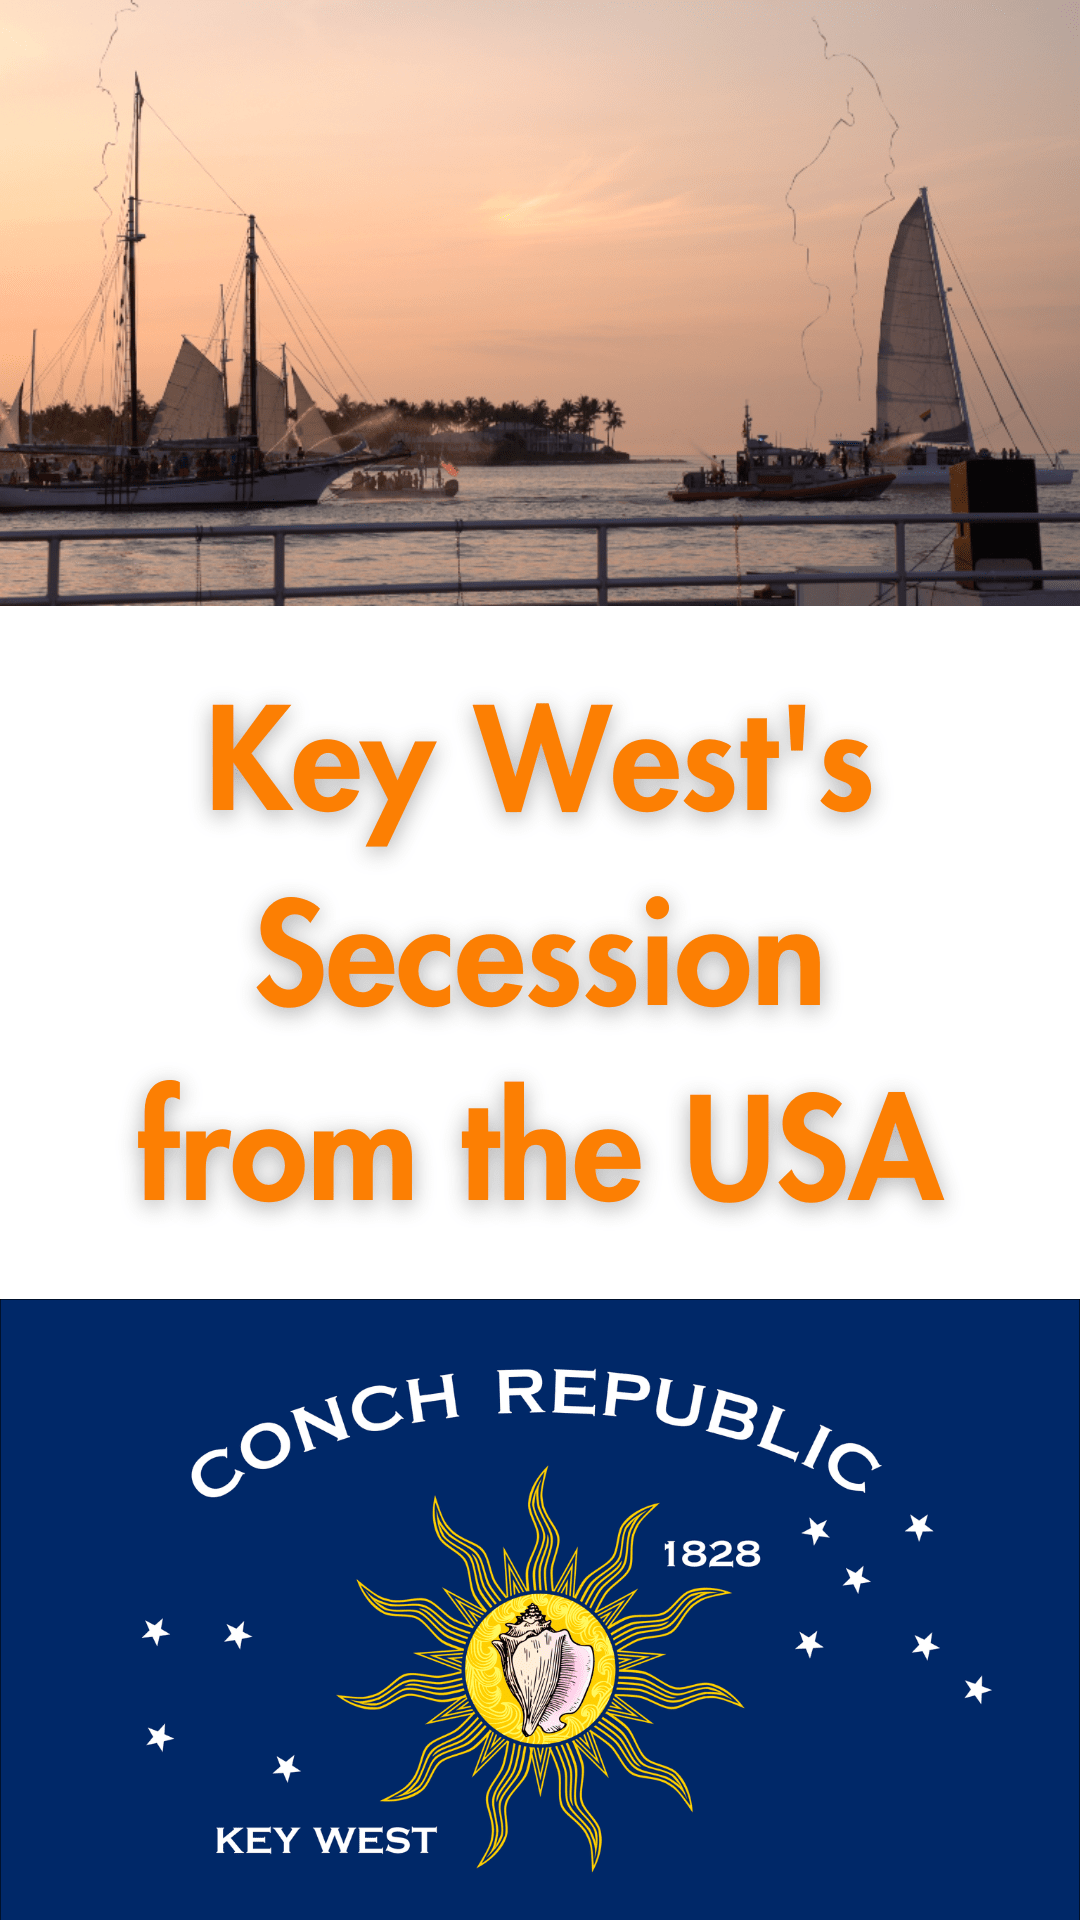 The Conch Republic A Tongue In Cheek Secession Of Key West Fitting In Adventure